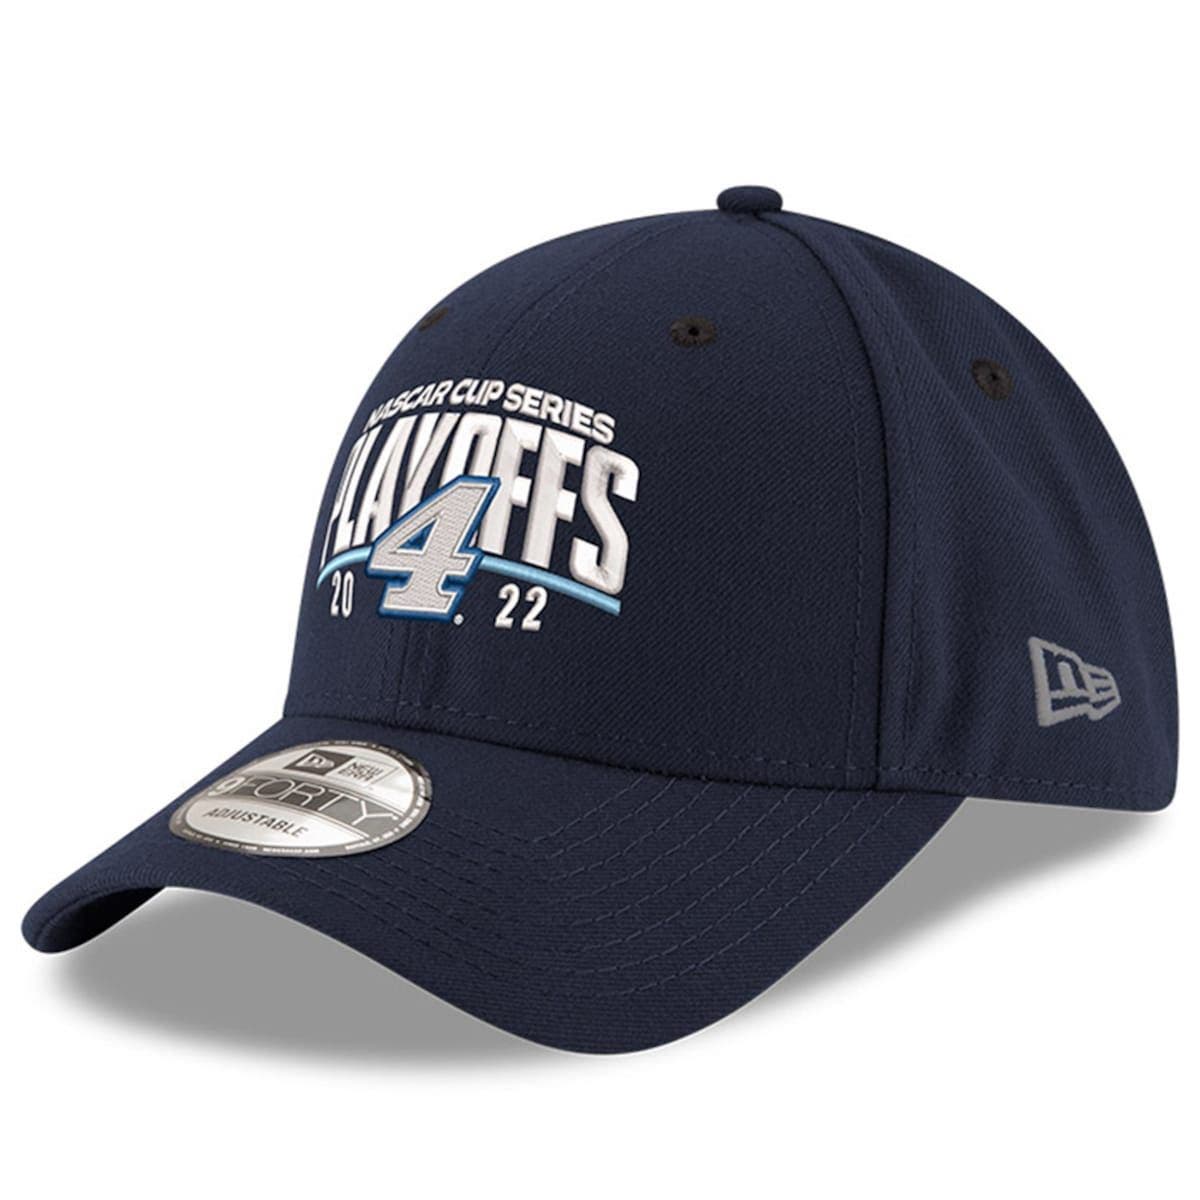 Top of the World Butler Bulldogs Adjustable Enzyme Washed Hat Navy, 